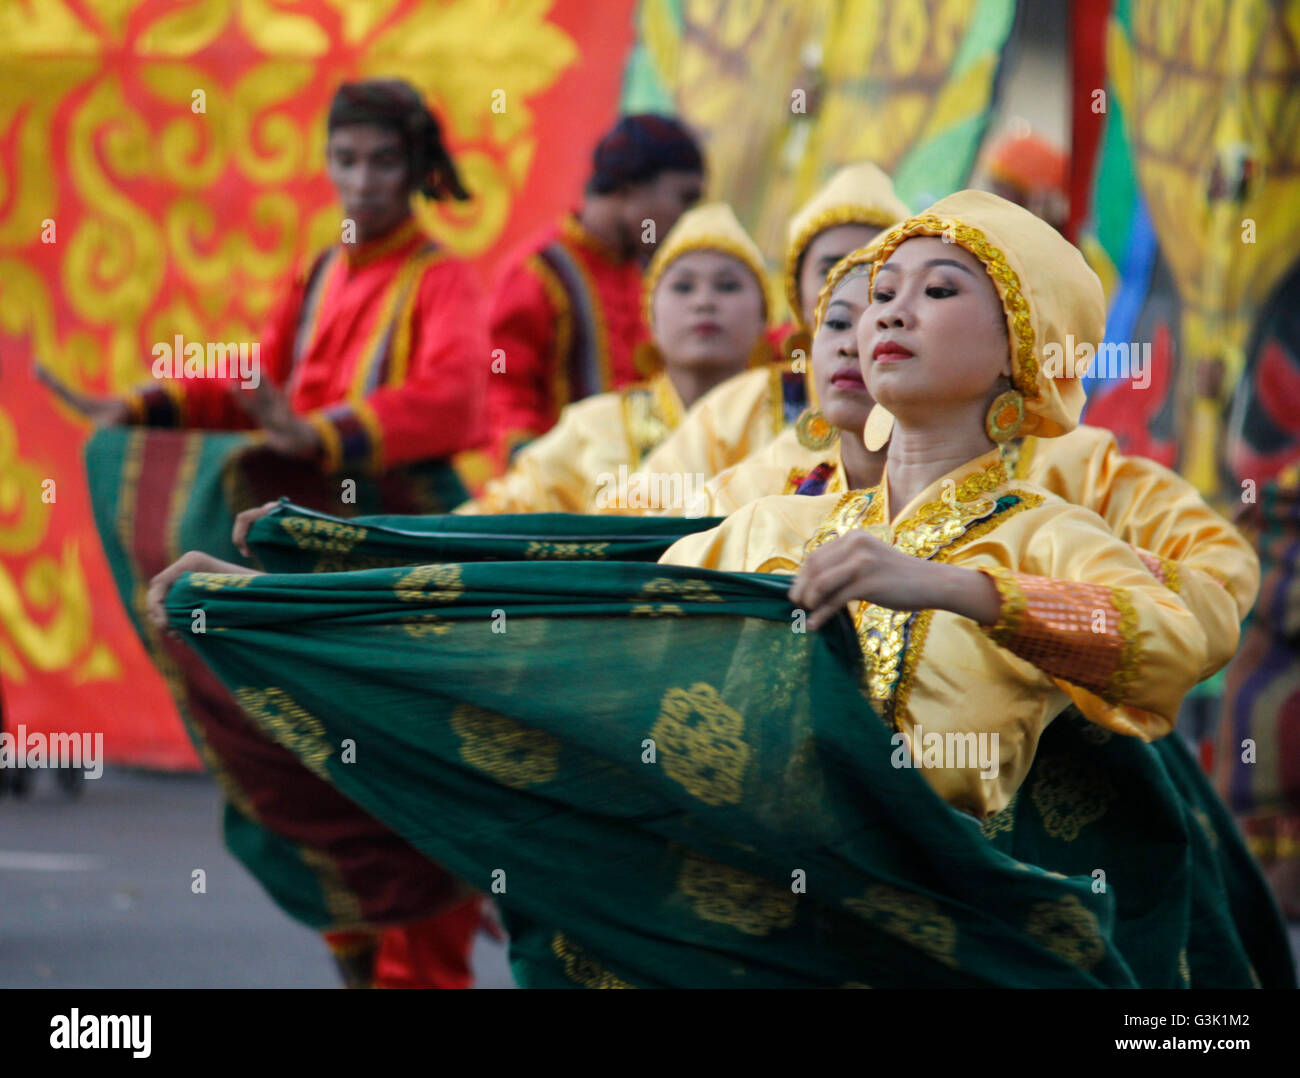 Manila, Philippines. 16th Apr, 2016. A member of Sagayan Festival of Datu Piang Maguindanao province performs as their group competes during the street dance competition at Aliwan Fiesta 2016 in Manila. It was an annual event that attracts foreign and local tourists showcasing Filipino culture and heritage of different regions. © Marlo Cueto/Pacific Press/Alamy Live News Stock Photo